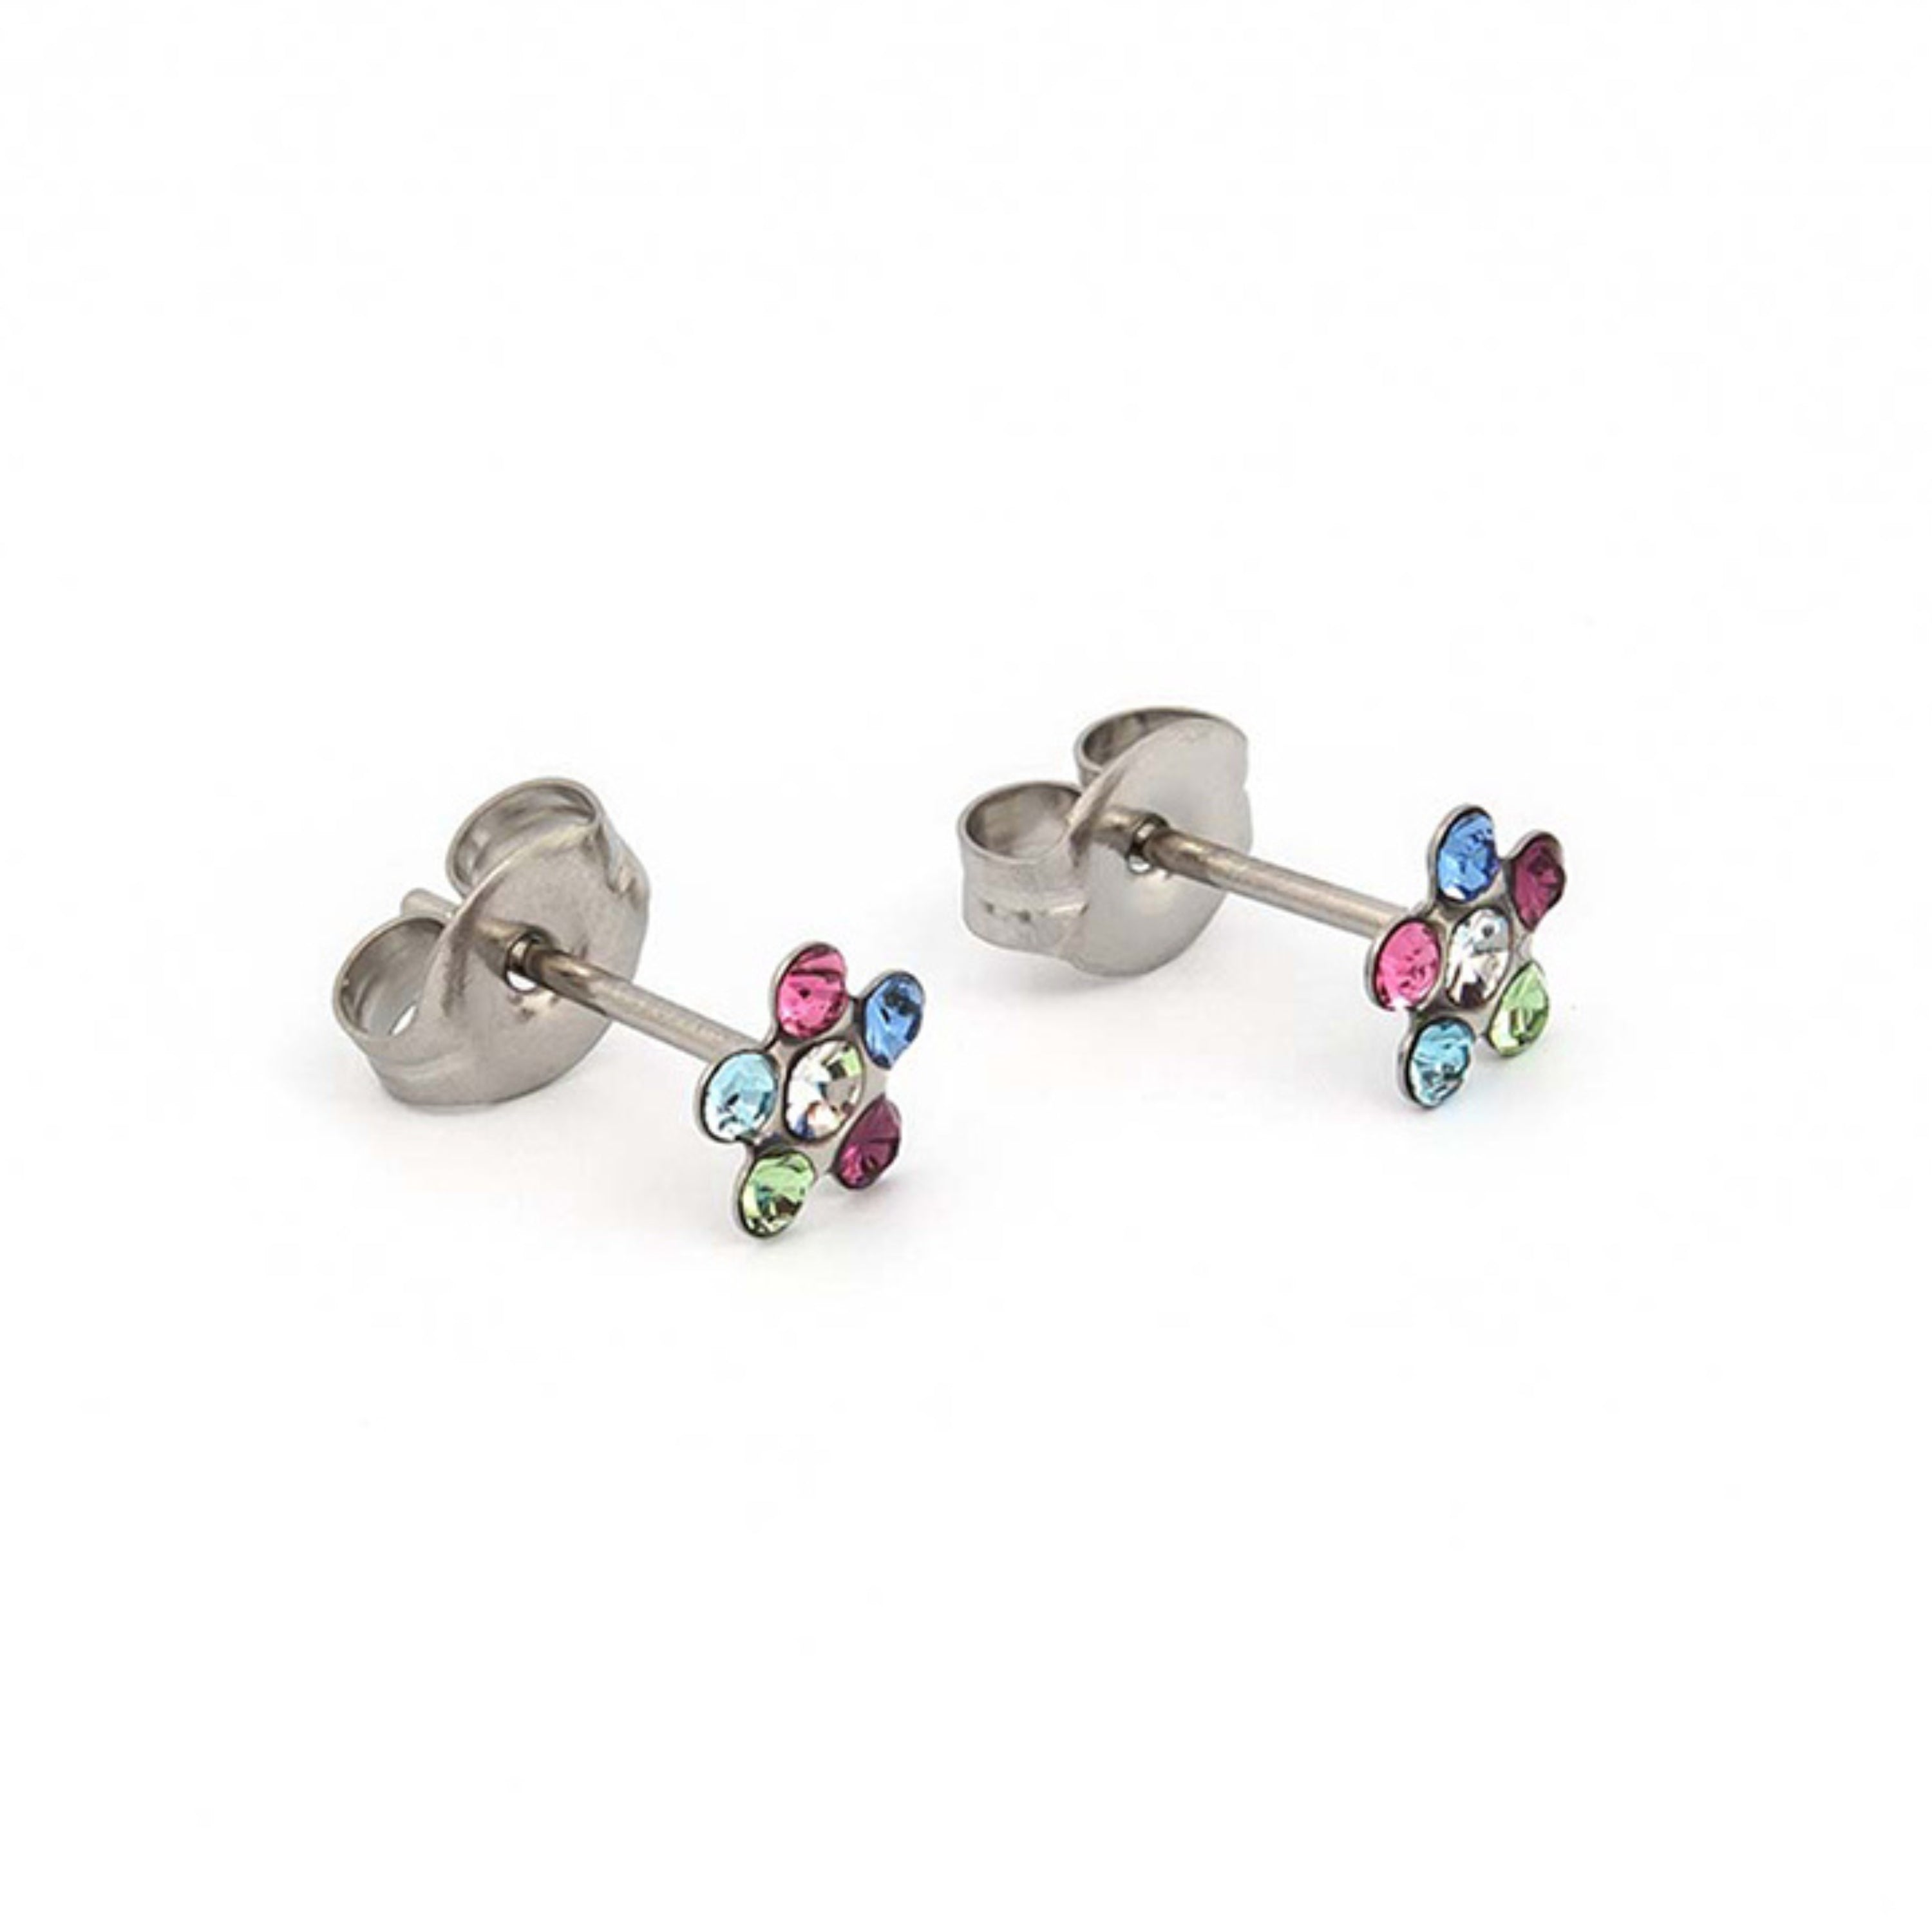 Daisy Rainbow Allergy free Stainless Steel Ear Studs For Kids | Ideal for everyday wear